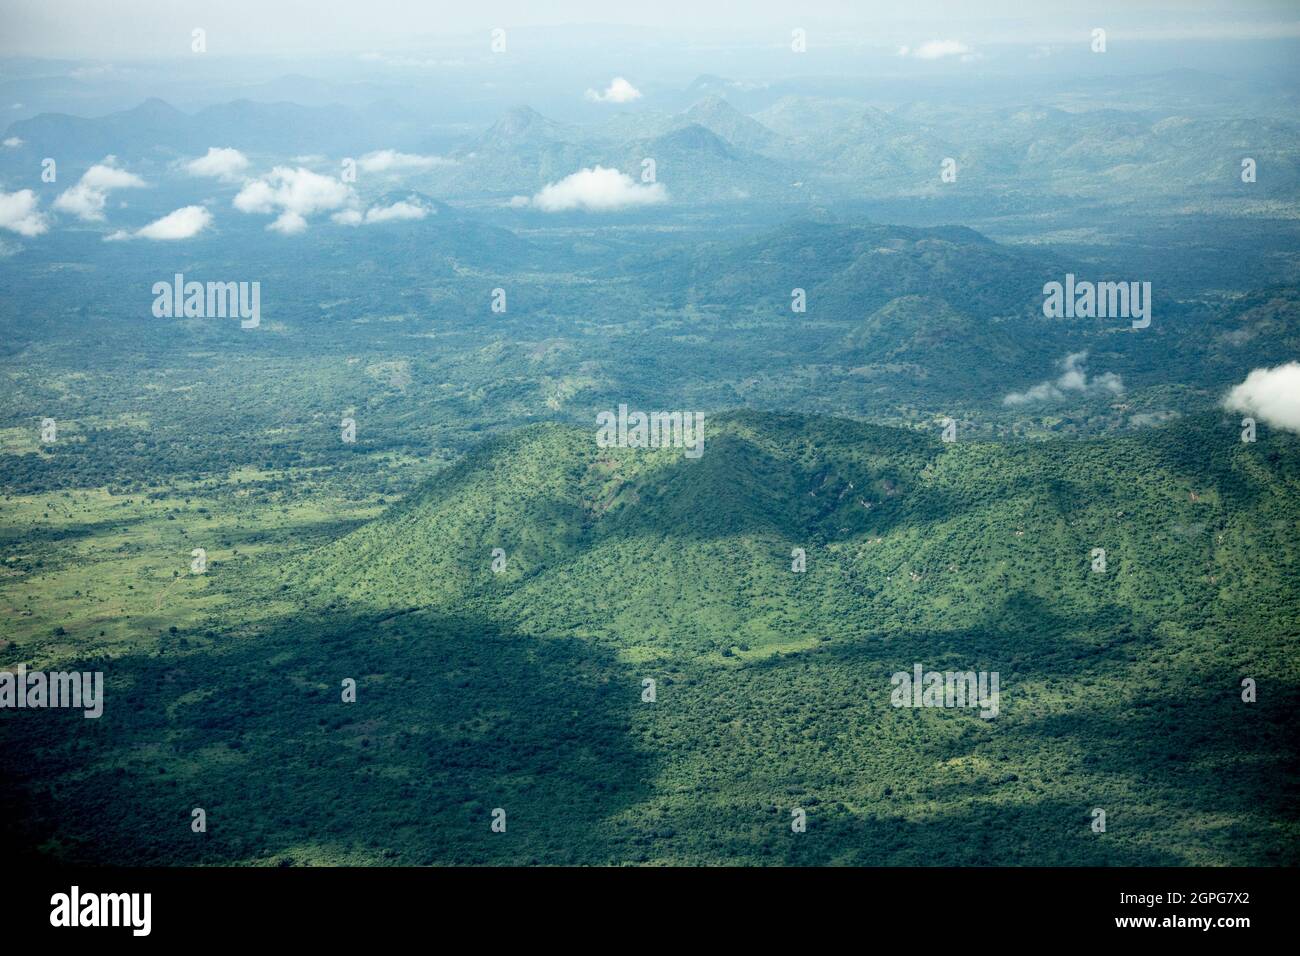 Aerial view of the Imatong Mountains and surrounding wilderness in South Sudan. Stock Photo